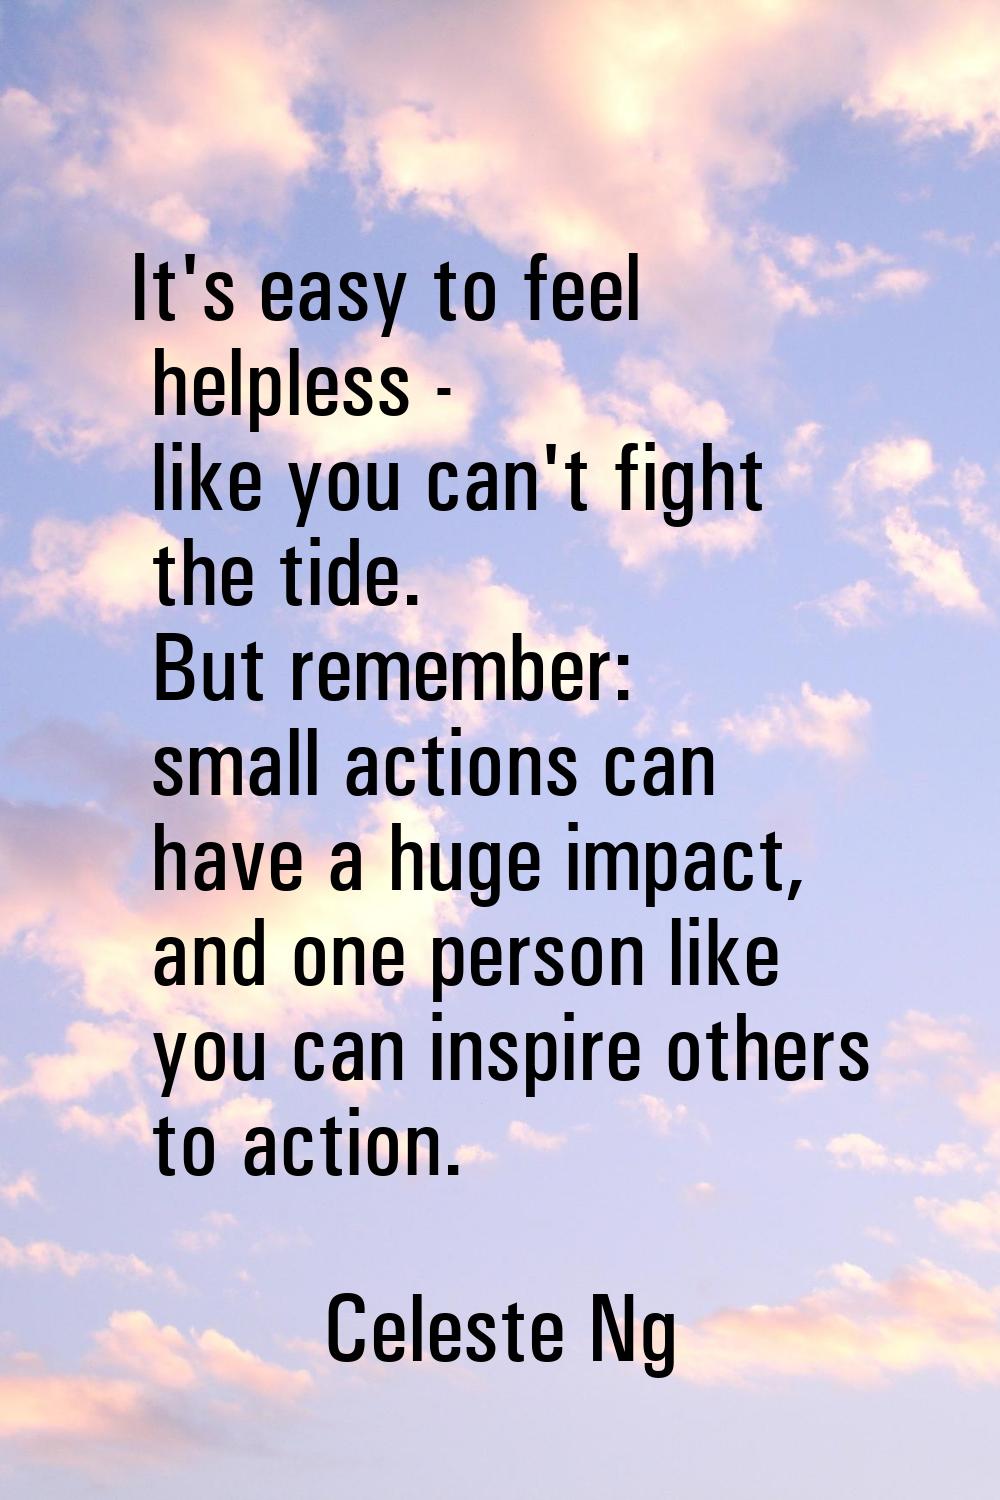 It's easy to feel helpless - like you can't fight the tide. But remember: small actions can have a 